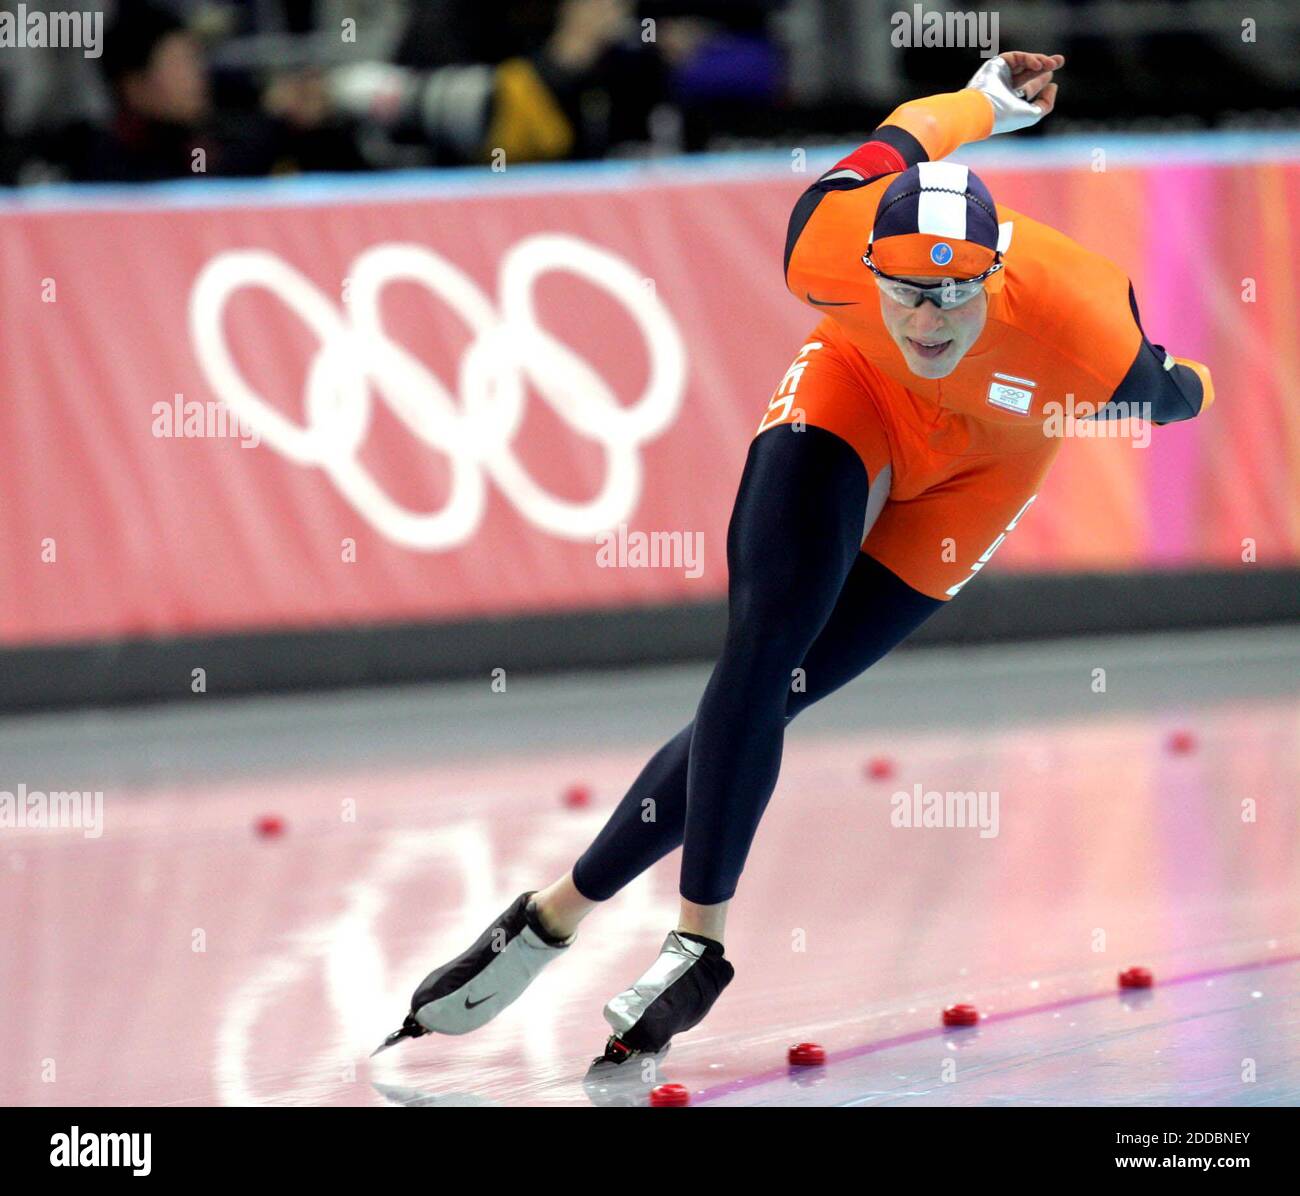 NO FILM, NO VIDEO, NO TV, NO DOCUMENTARY - Speedskater Sven Kramer, of the Netherlands, skates through a turn during his silver-medal run in the men's 5000m speed skating event at the Oval Lingotto venue on February 11, 2006, during the 2006 Winter games in Turin, Italy. Photo by Ron Jenkins/Fort Worth Star-Telegram/KRT/Cameleon/ABACAPRESS.COM Stock Photo